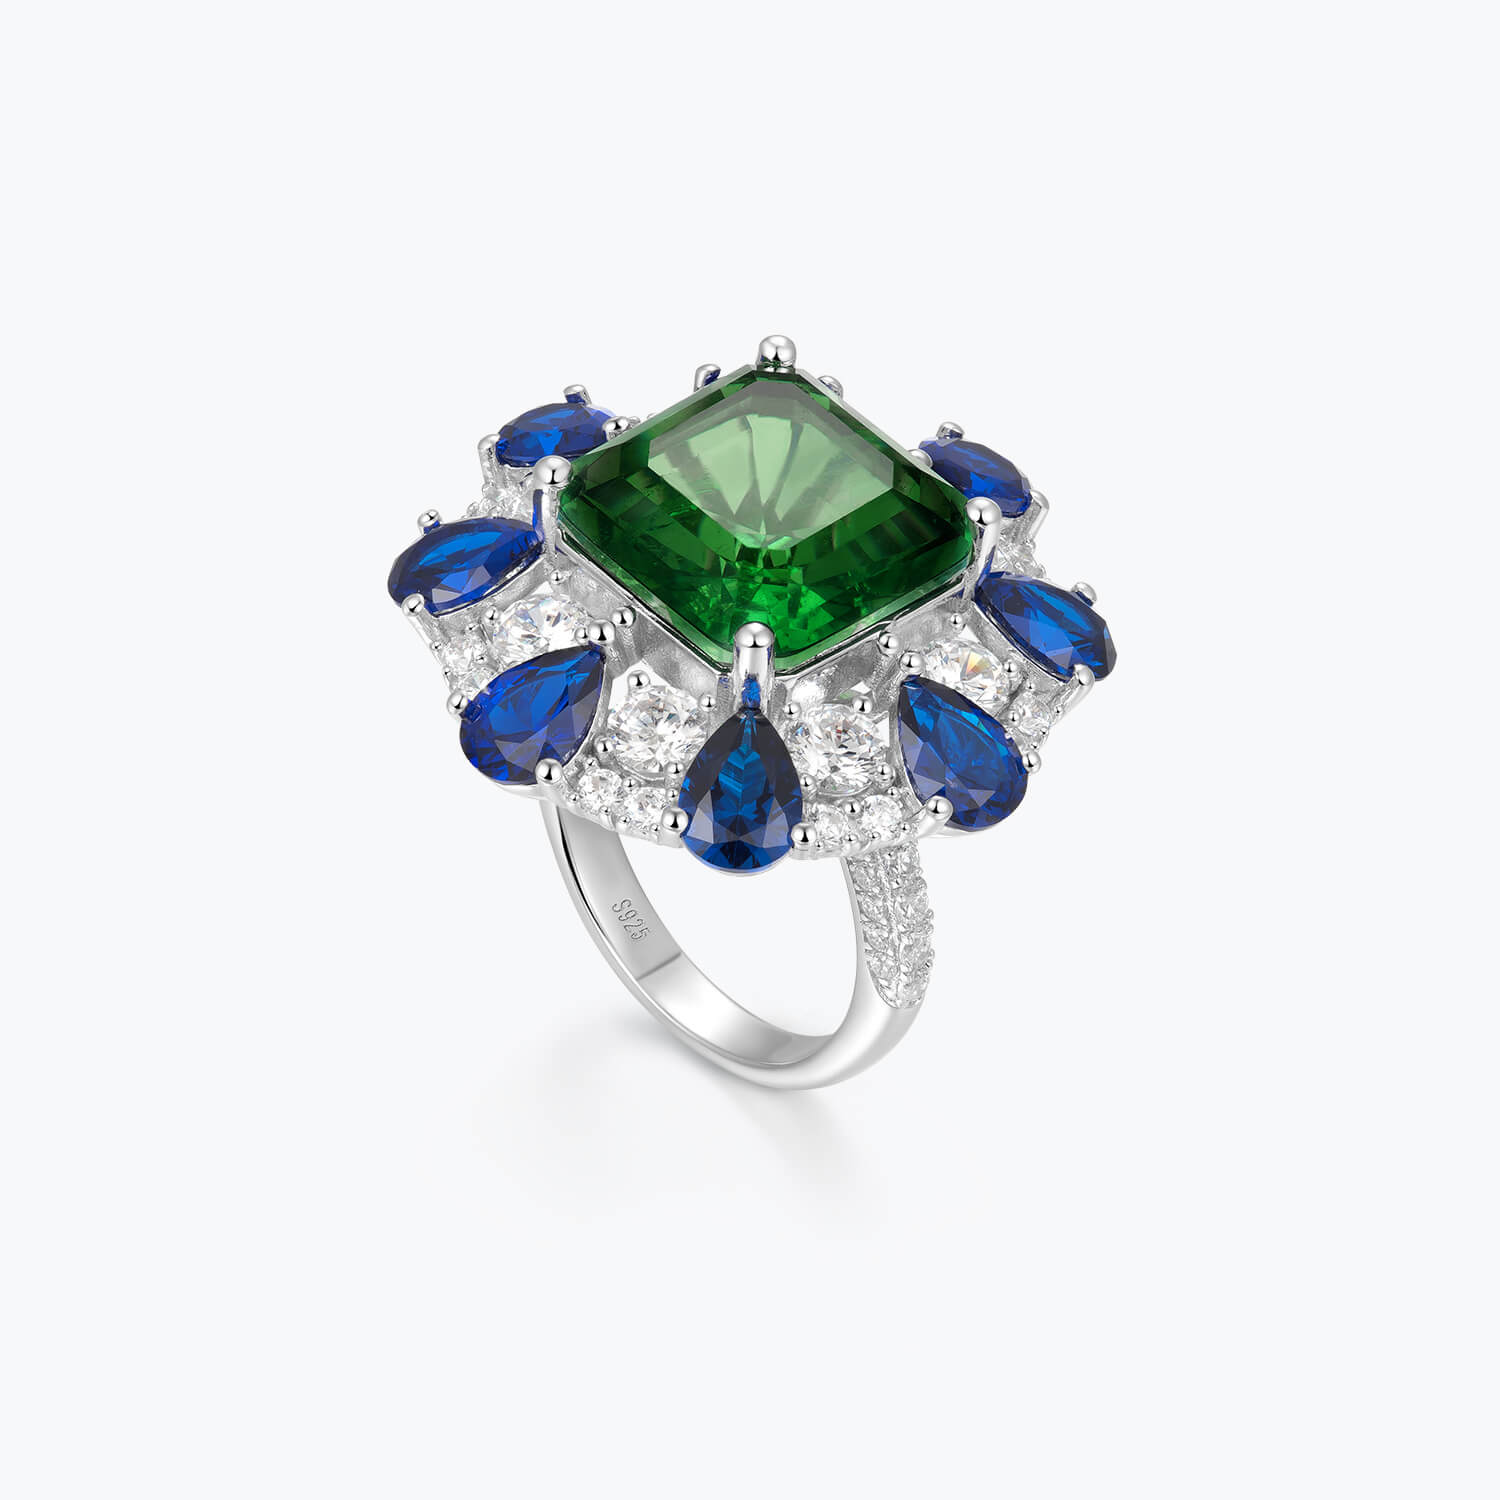 Asscher Cut Emerald Green Evening Ring with Blue&White Floral Cluster - dissoojewelry